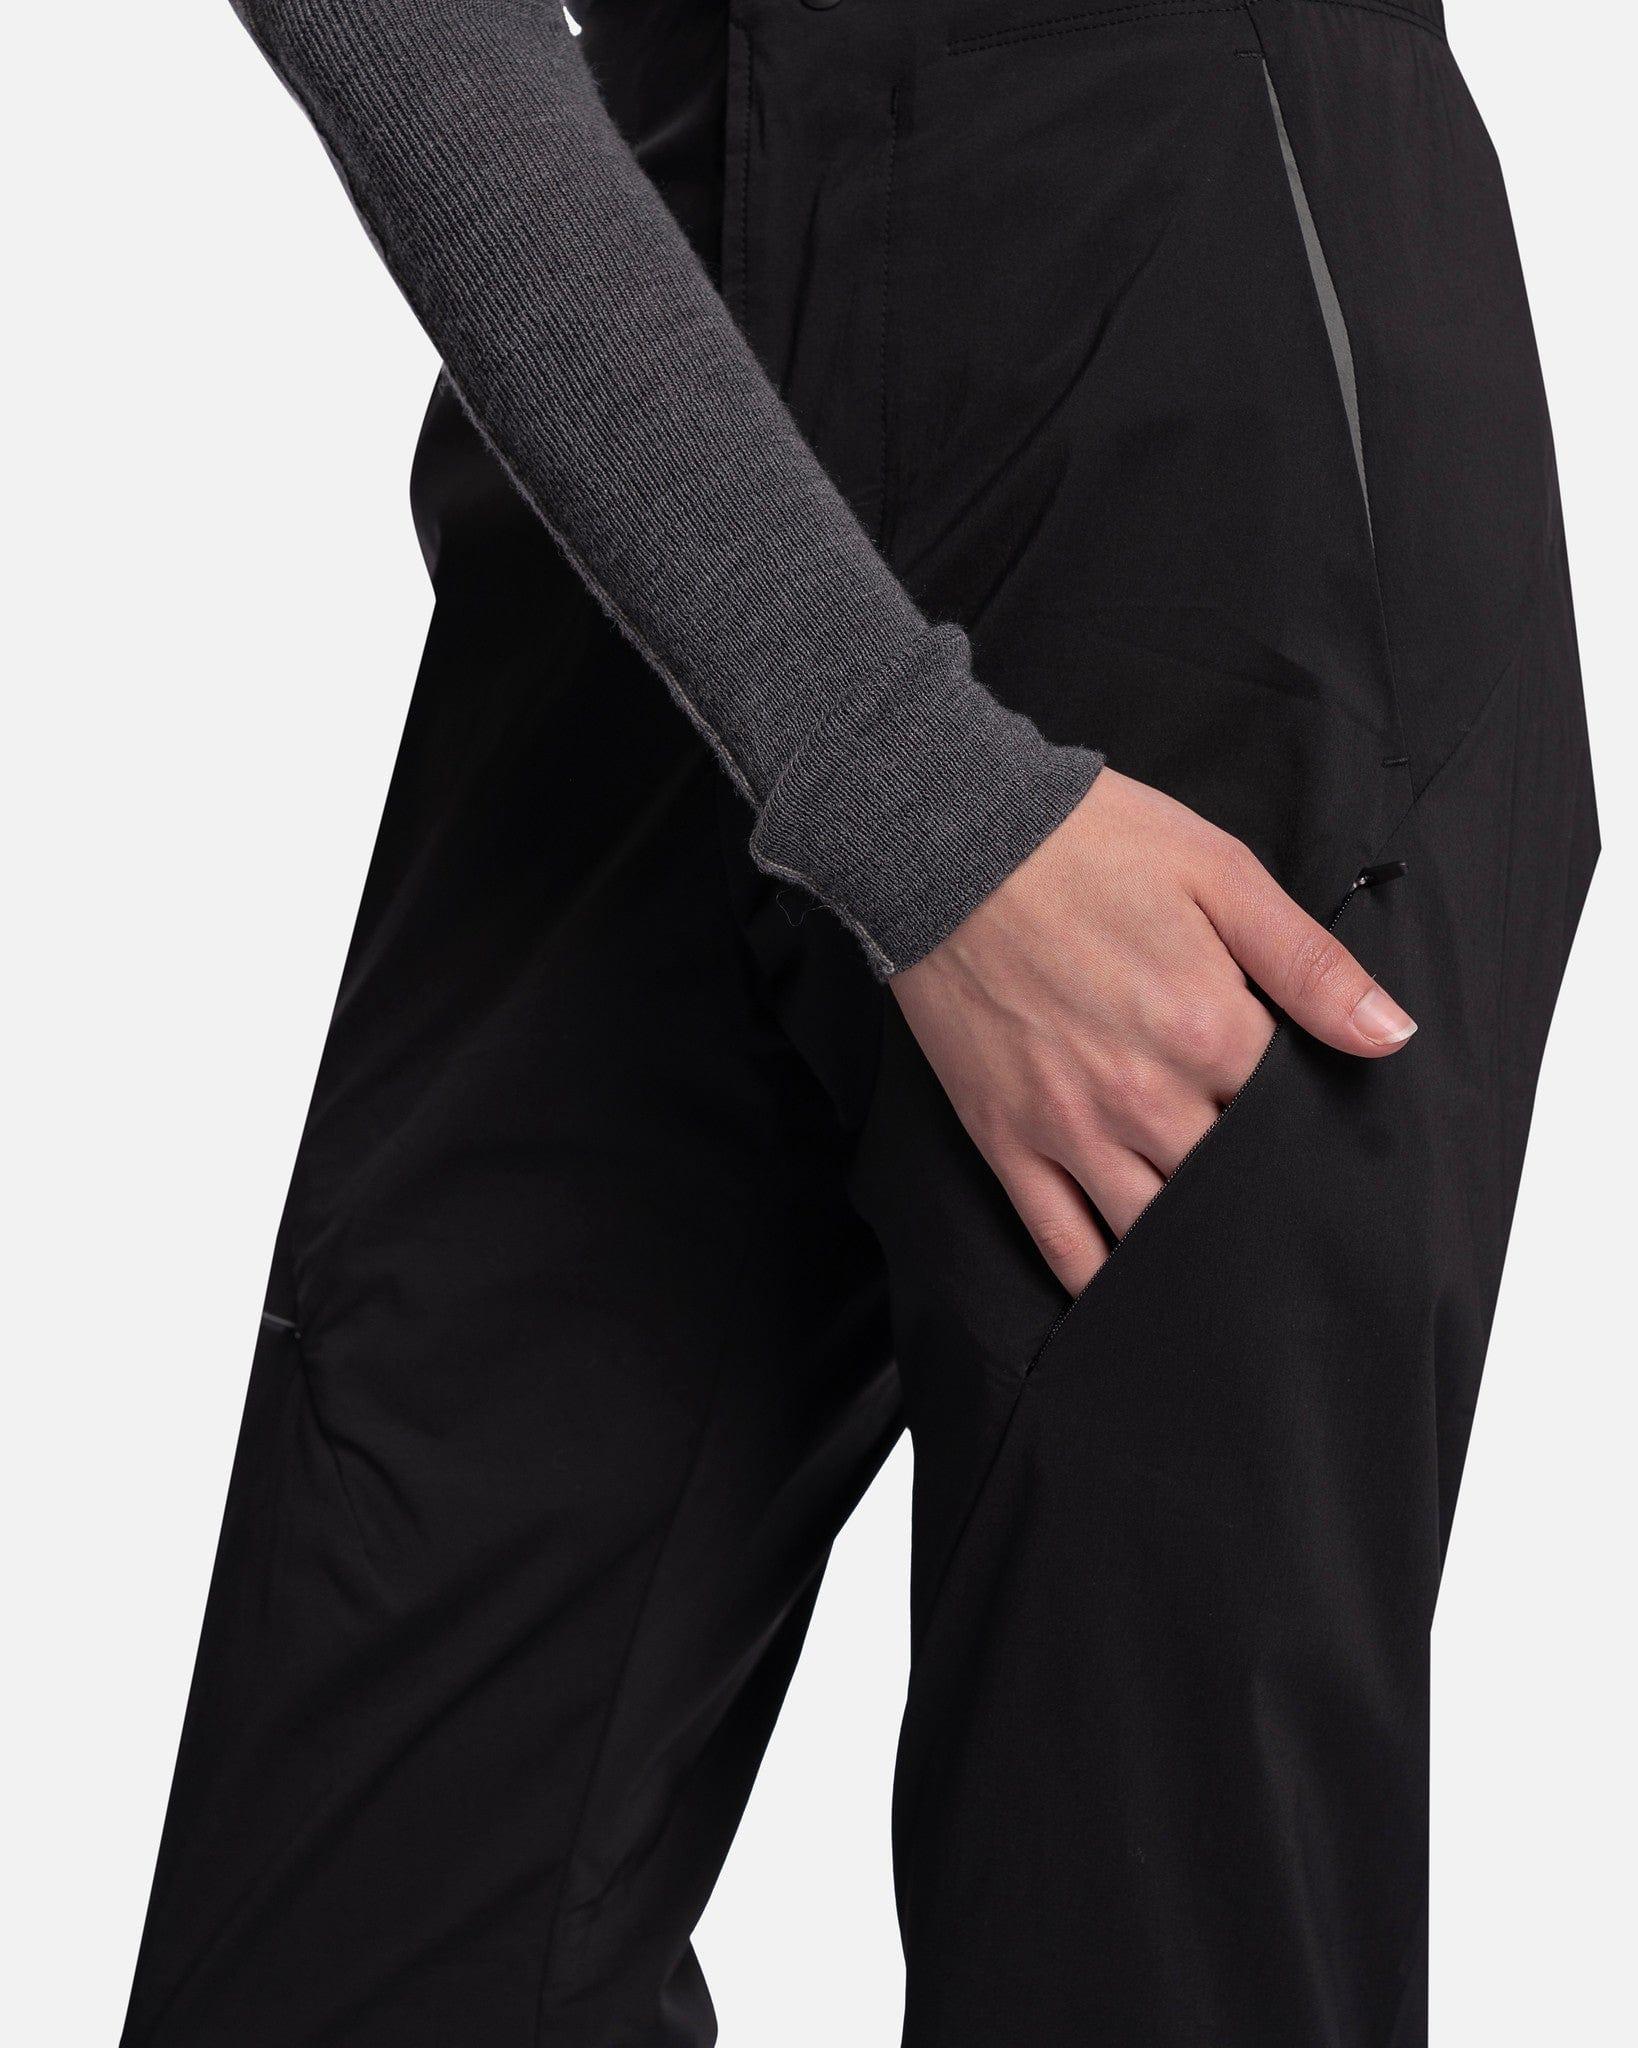 Post Archive Faction PAF 5.0+ Technical Pants Right in Black | Lyst